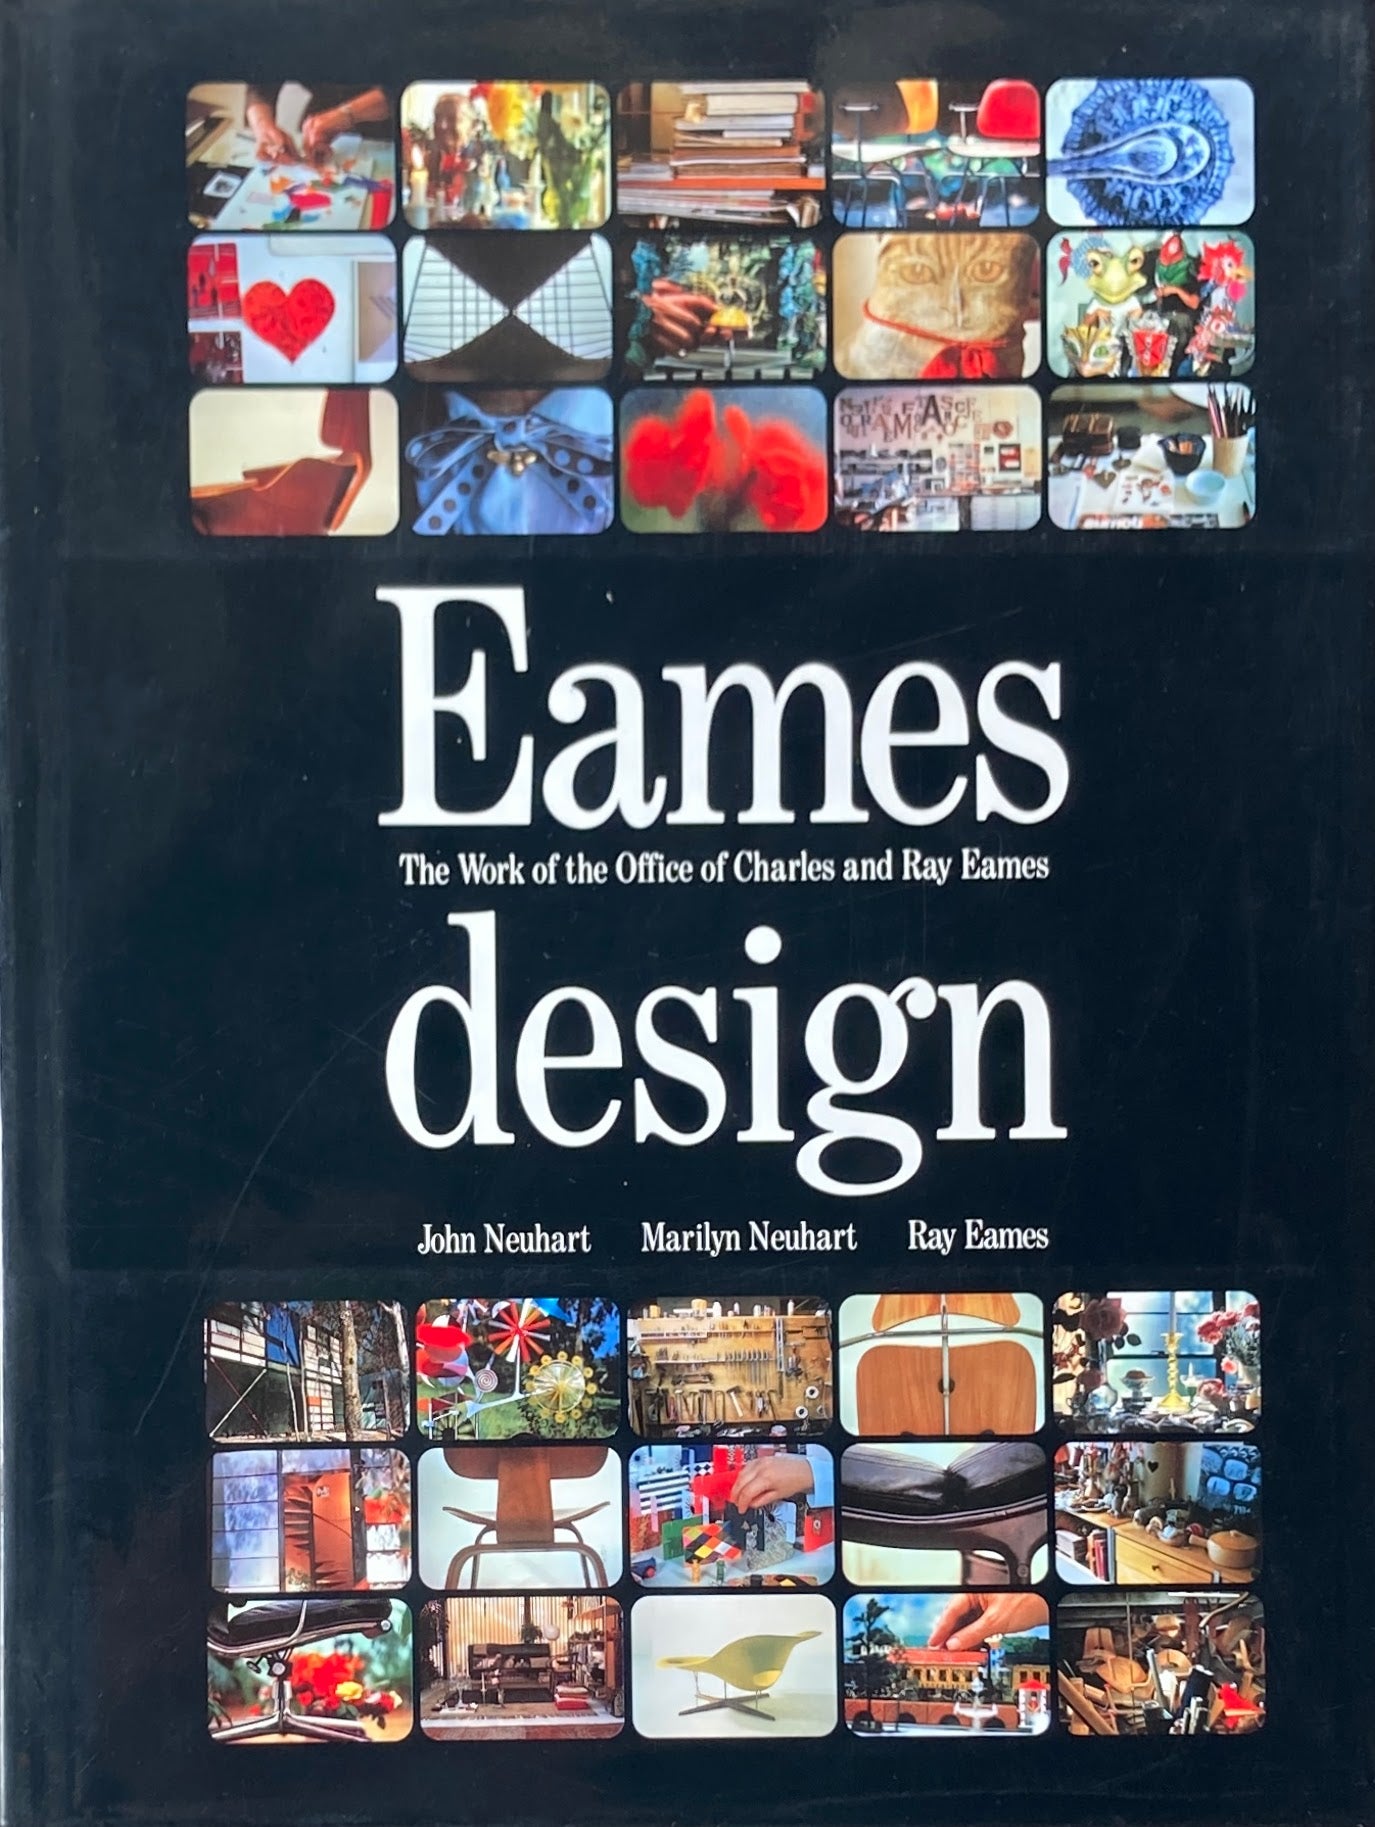 Eames design　The Work of the Office of Charles and Ray Eames　John Neuhart,Marilyn Neuhart, Ray Eames　イームズ・デザイン